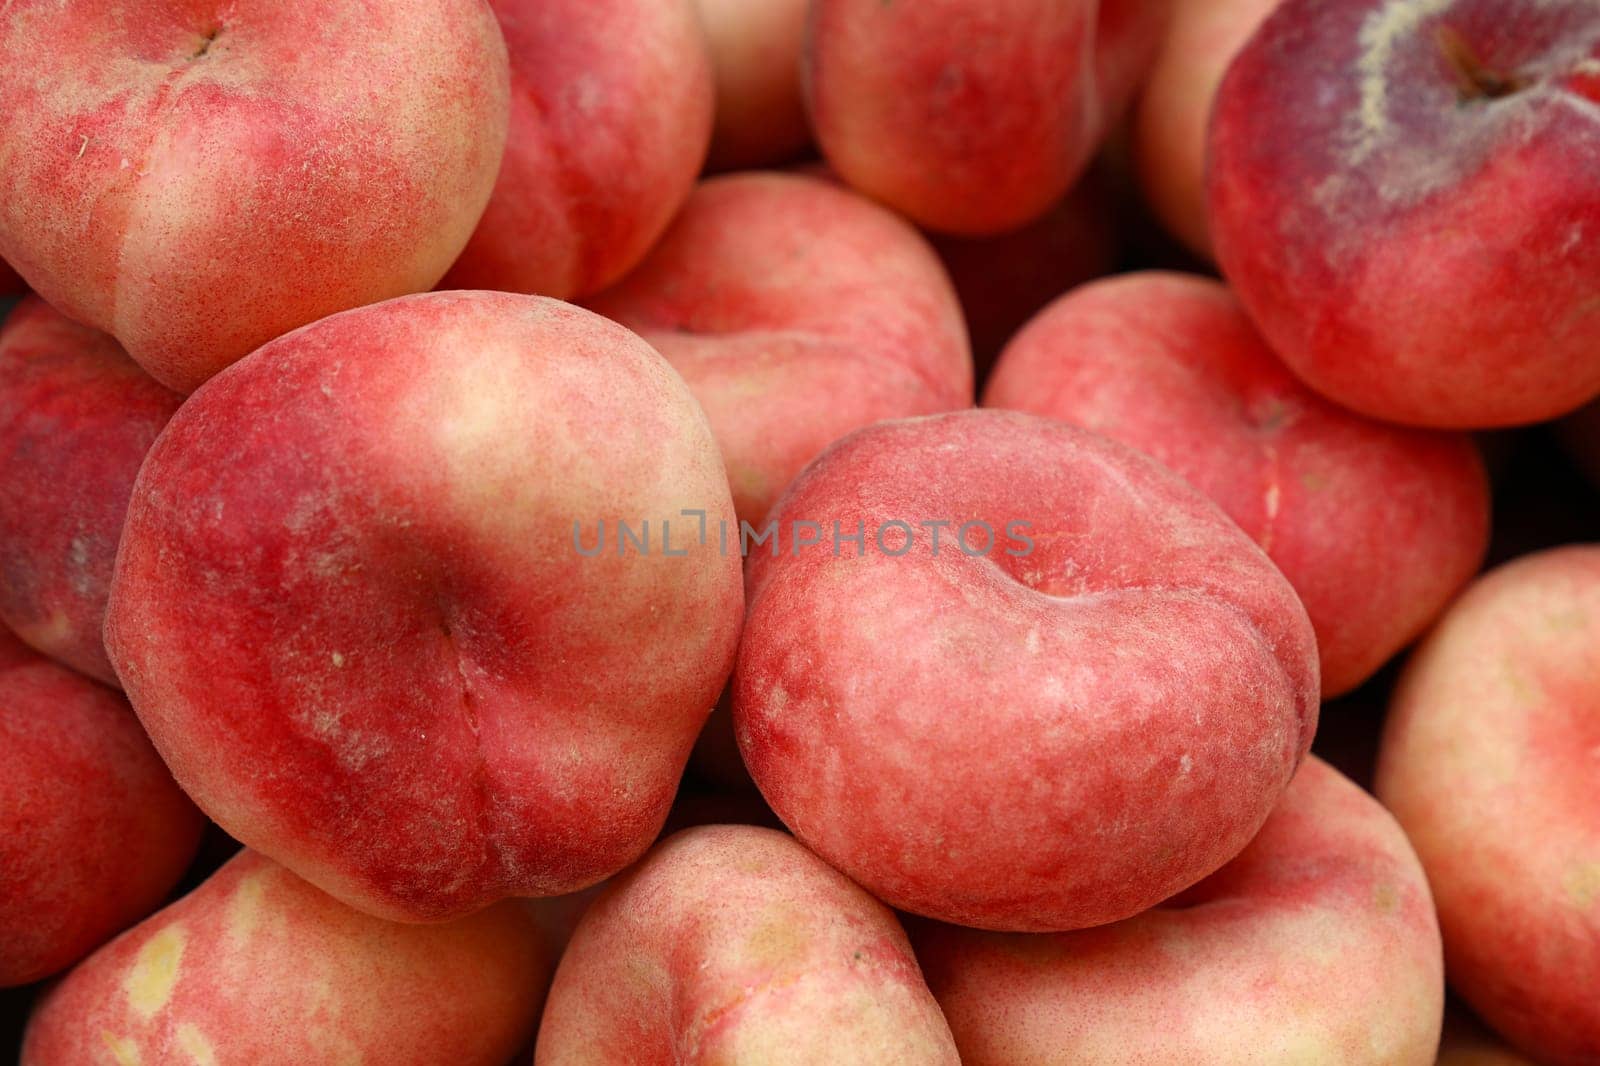 Fresh peaches on market stall by BreakingTheWalls